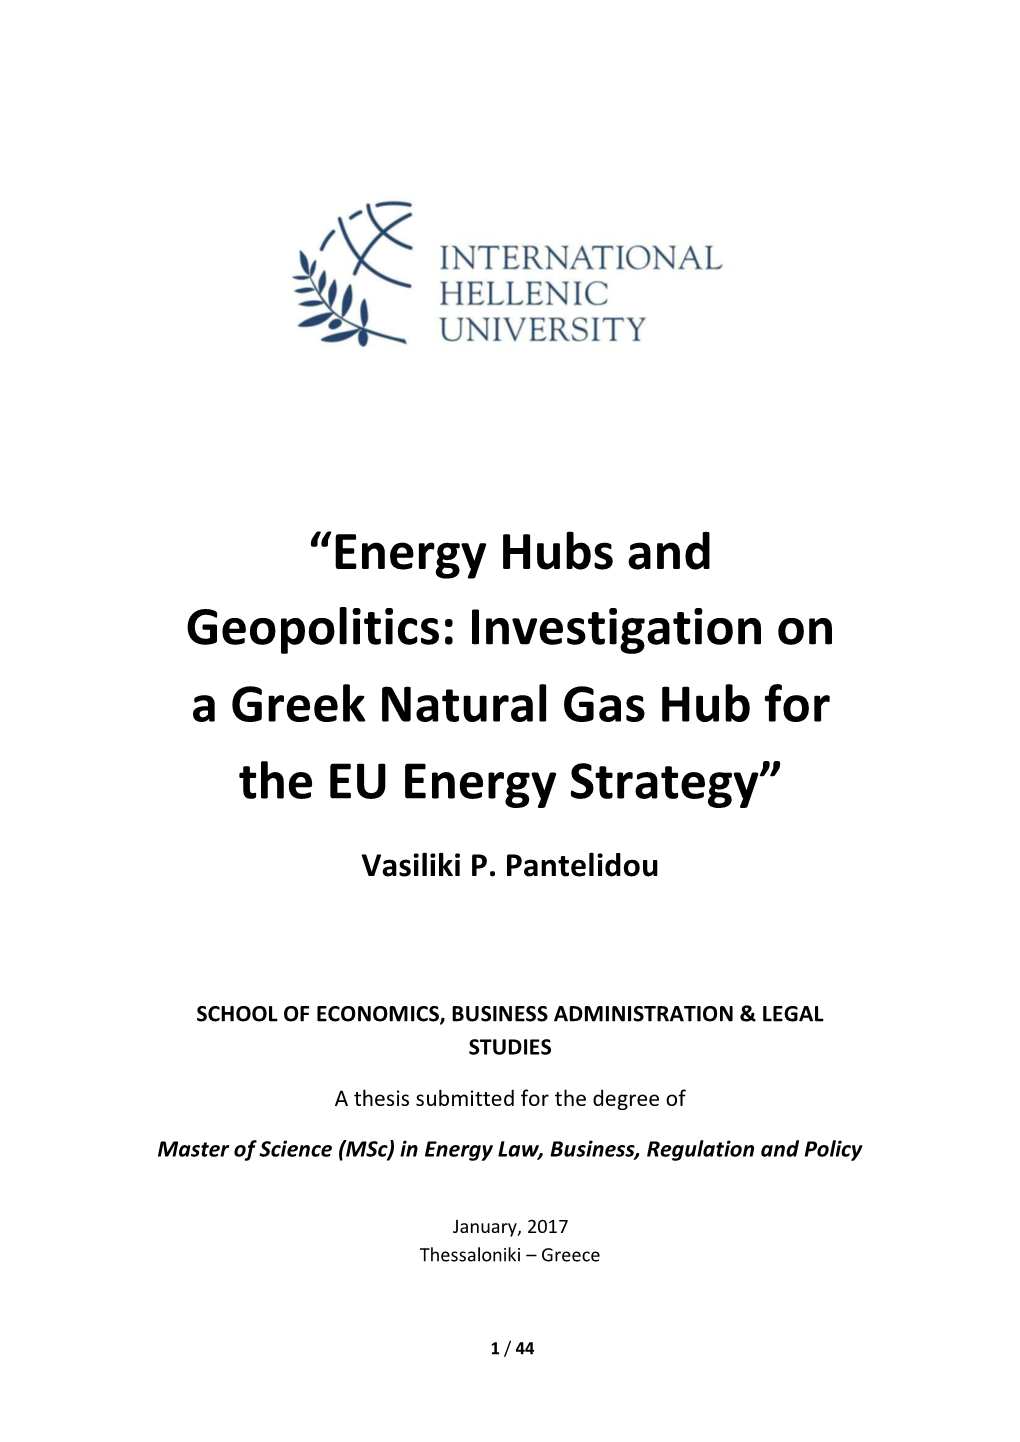 Energy Hubs and Geopolitics: Investigation on a Greek Natural Gas Hub for the EU Energy Strategy”